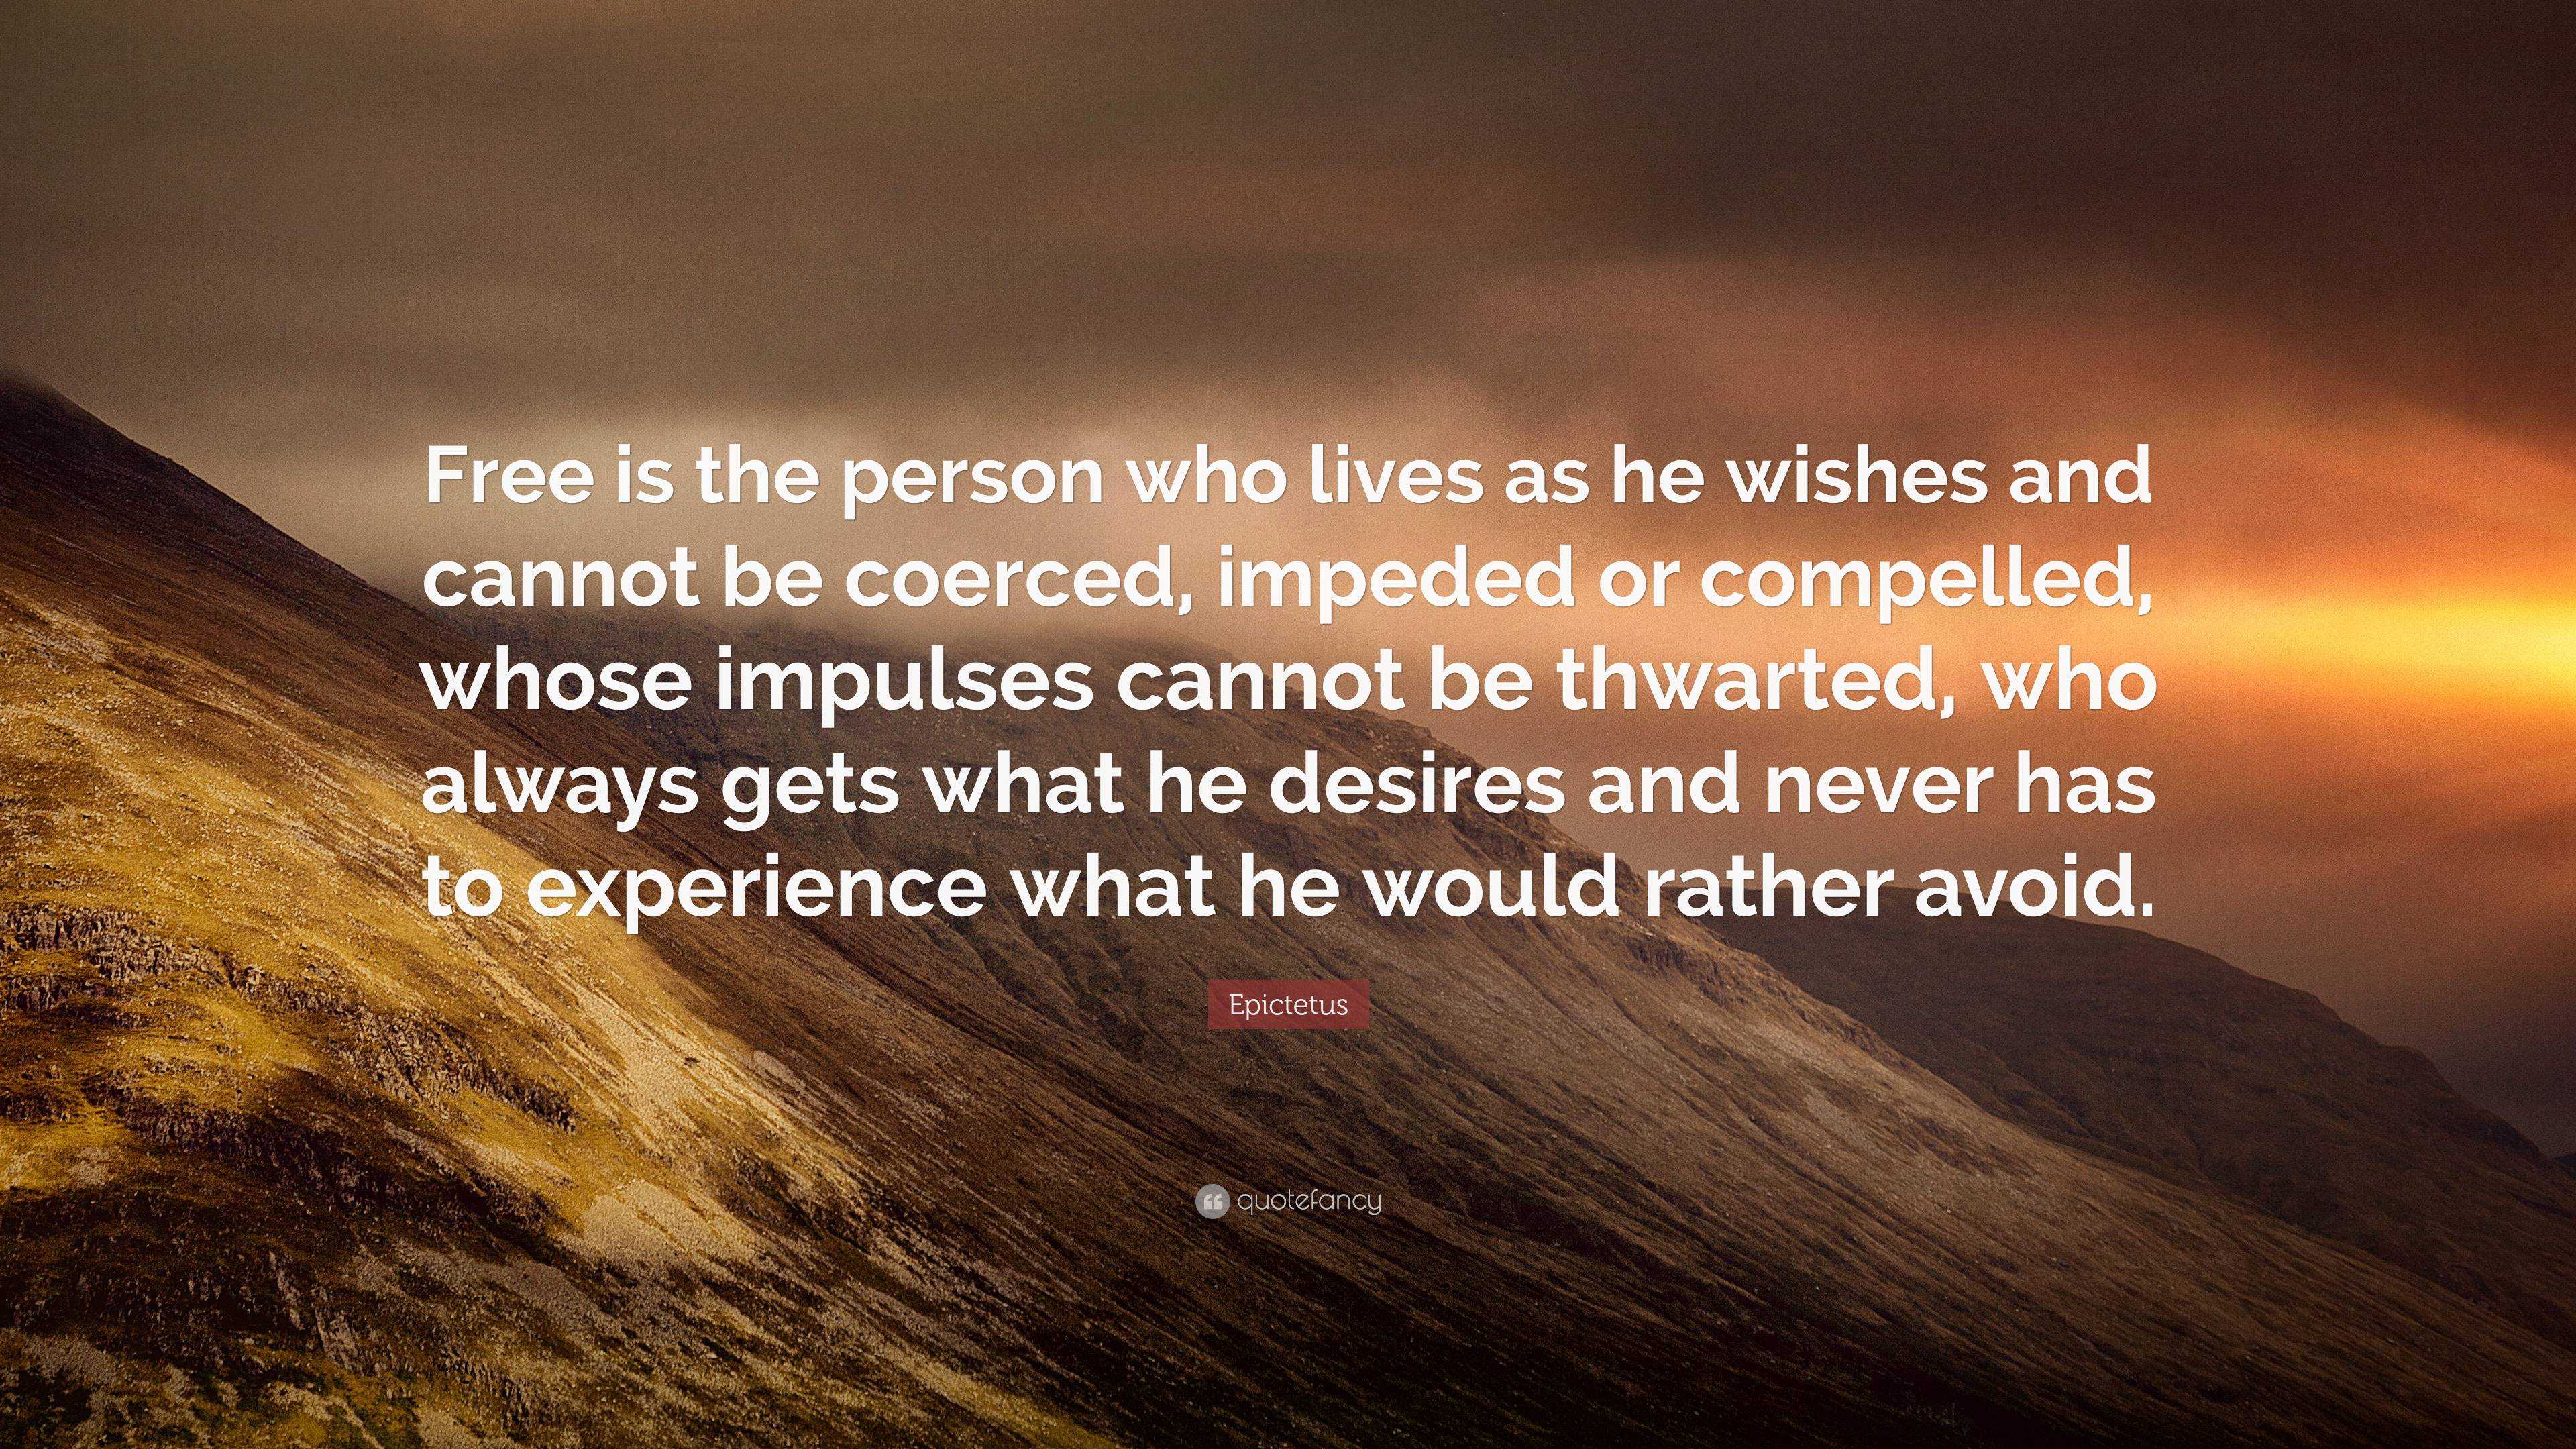 Epictetus Quote: “Free is the person who lives as he wishes and cannot ...